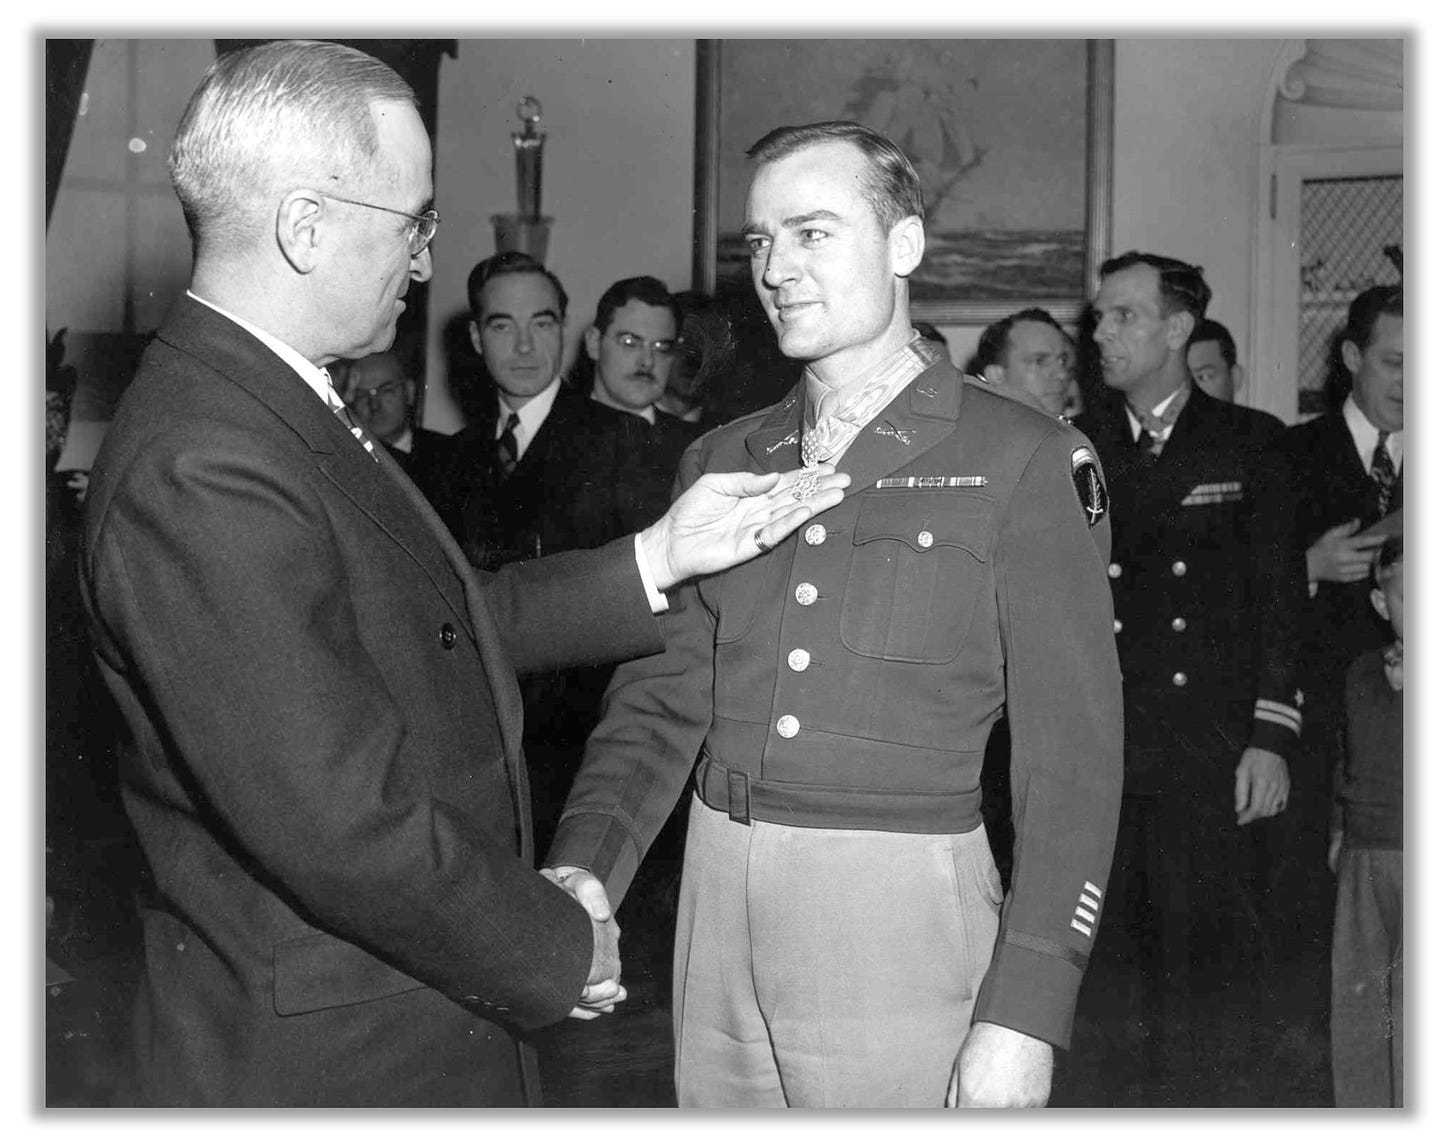 Lee receives the Medal of Honor from Truman. The two men are smiling.